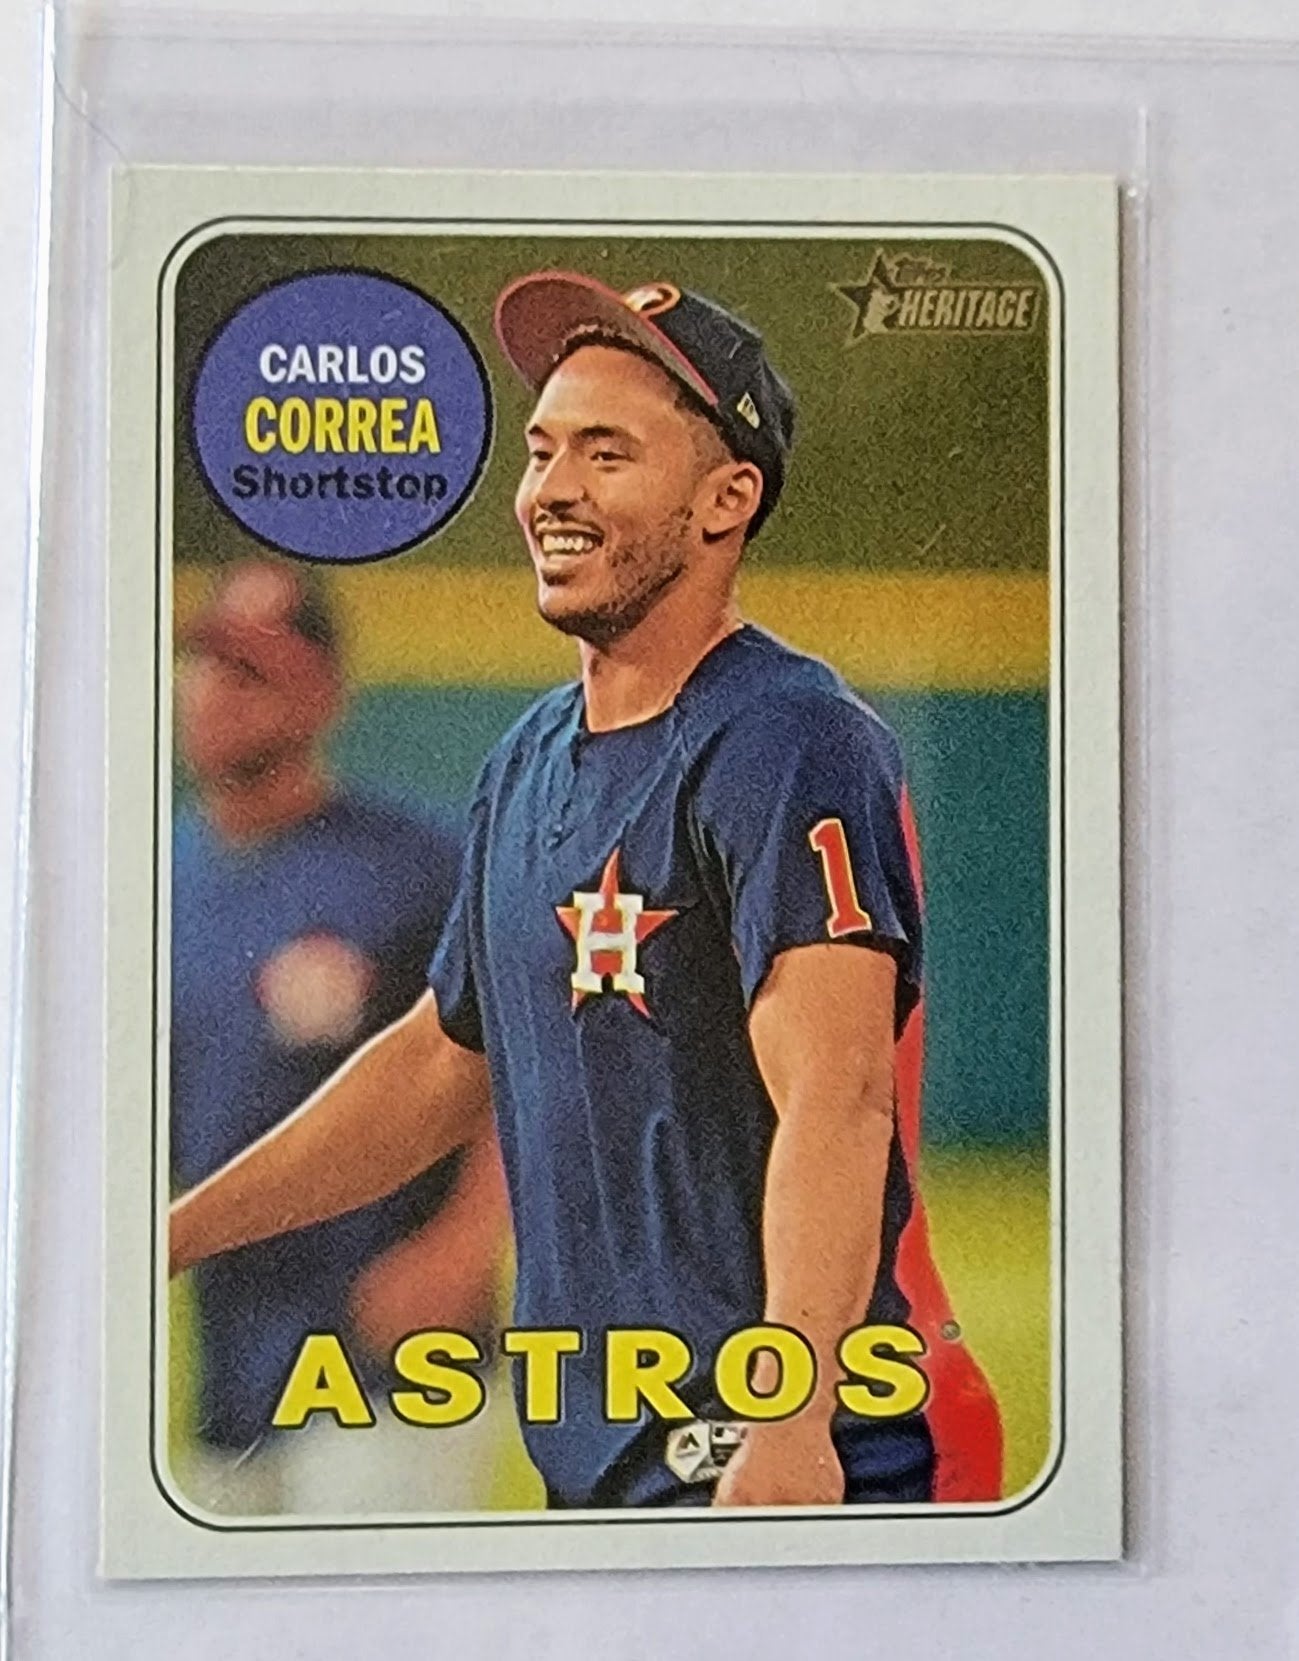 2018 Topps Heritage Carlos Correa Baseball Trading Card TPTV simple Xclusive Collectibles   